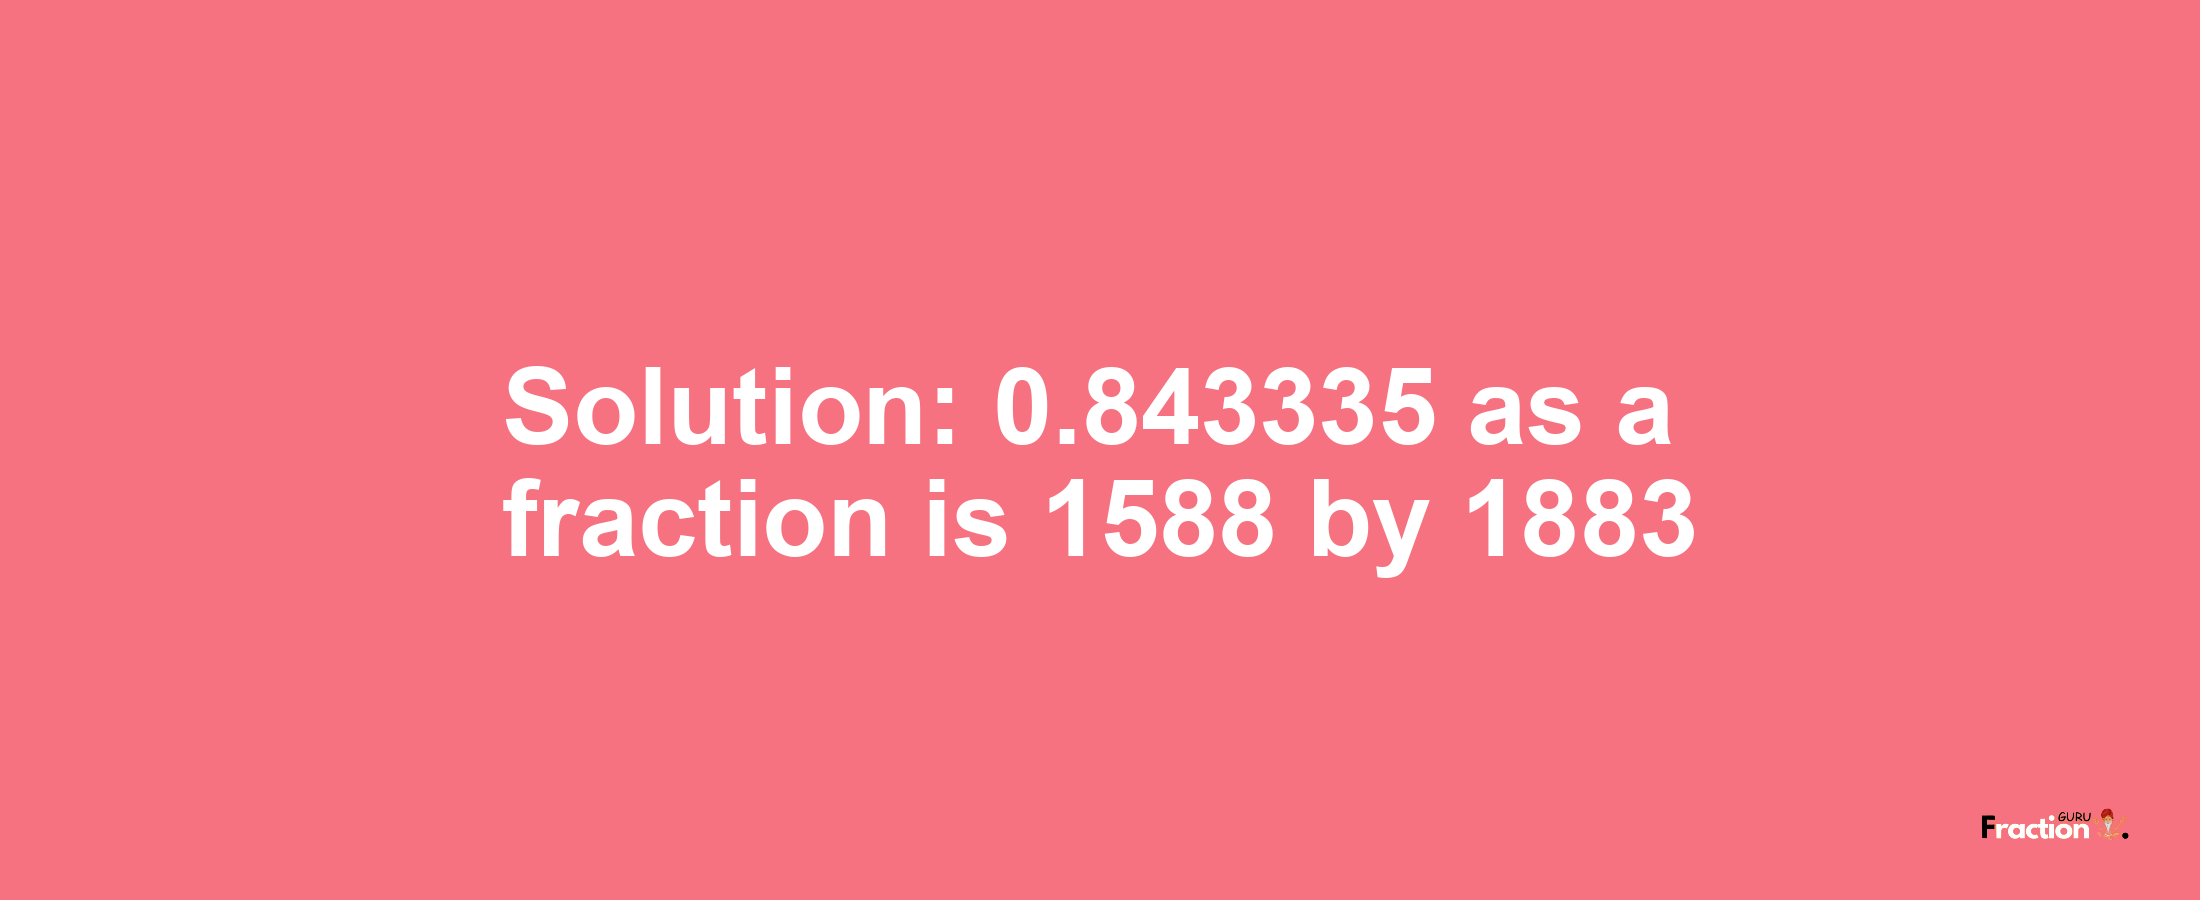 Solution:0.843335 as a fraction is 1588/1883